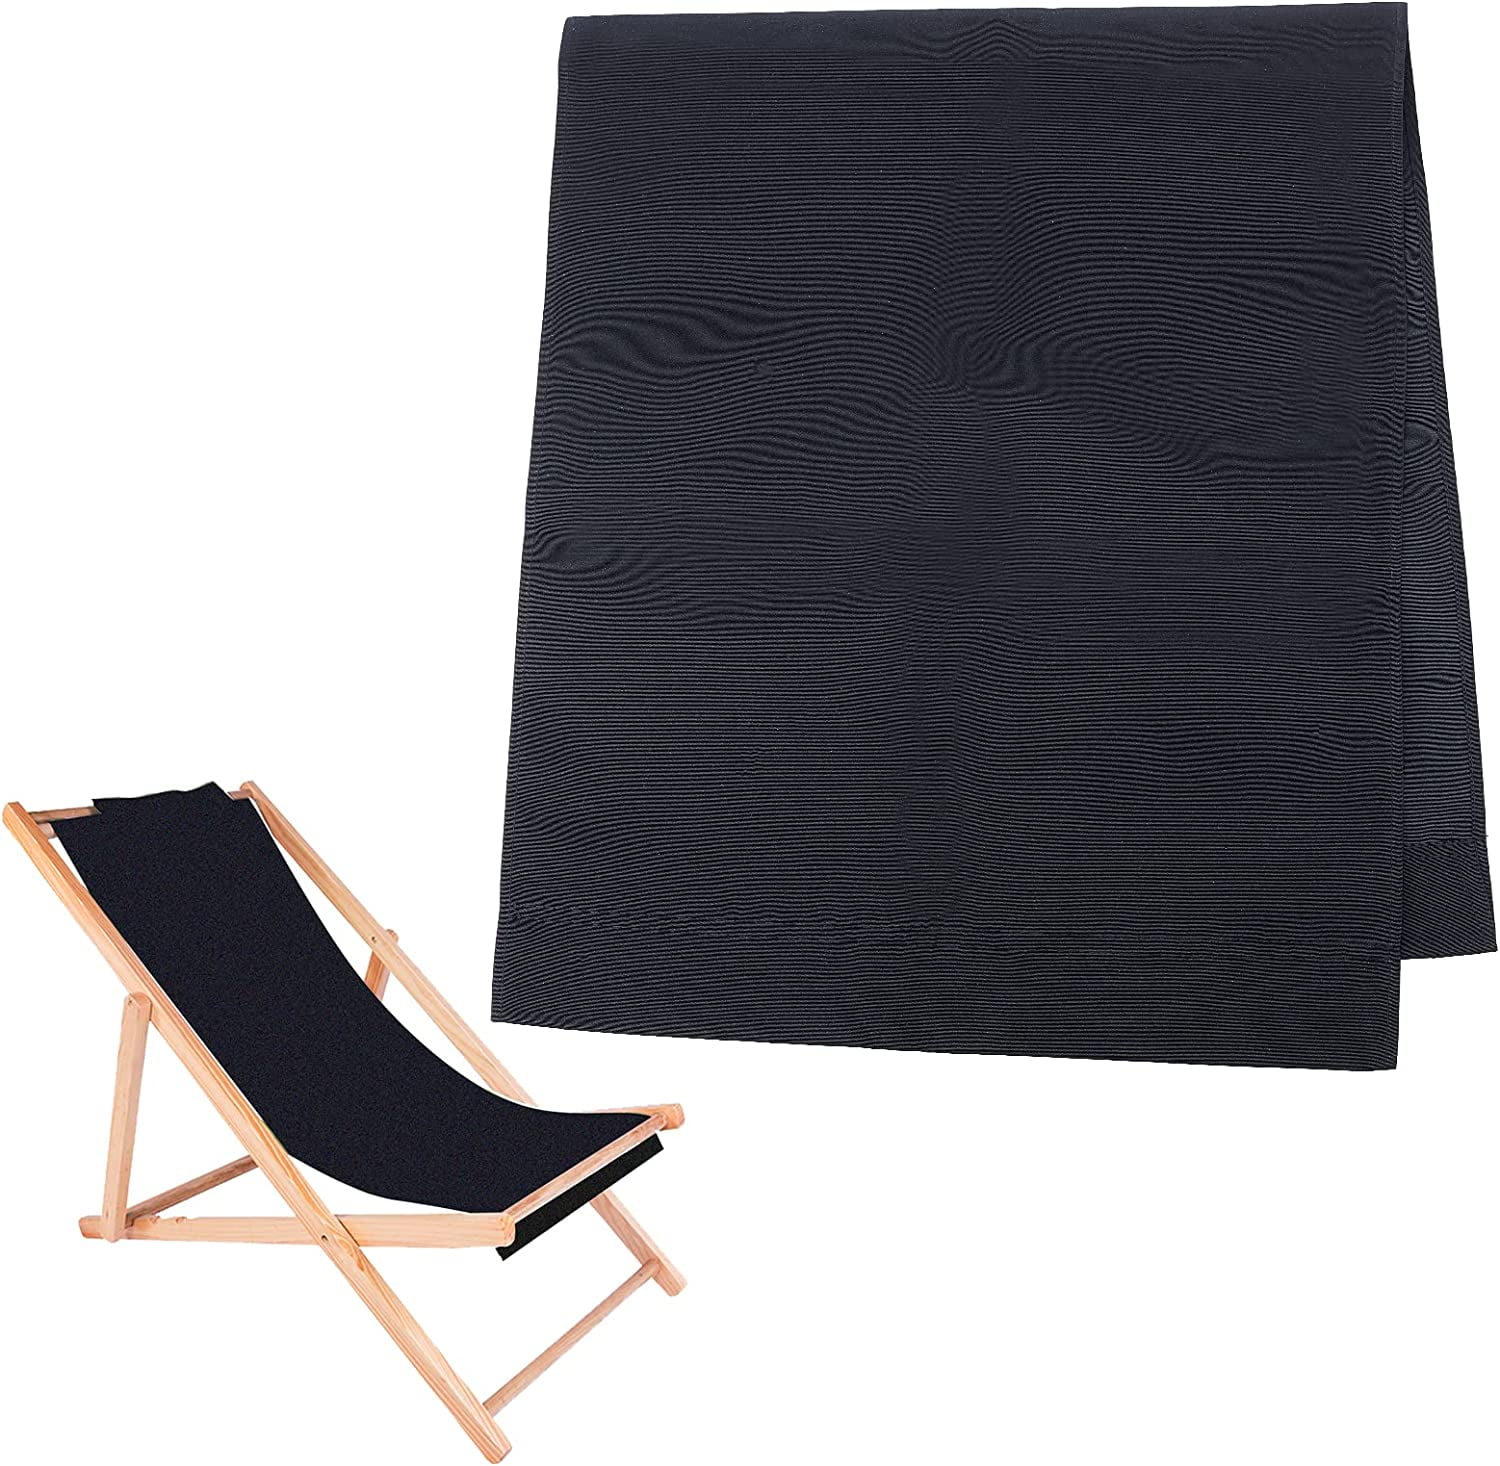 Beach Sling Chair Replacement Fabric Black Casual Simple Beach Chair Replacement Oxford Cloth for Home Beach Chair Protect Replacement (44.69x17.13inch) - image 1 of 5